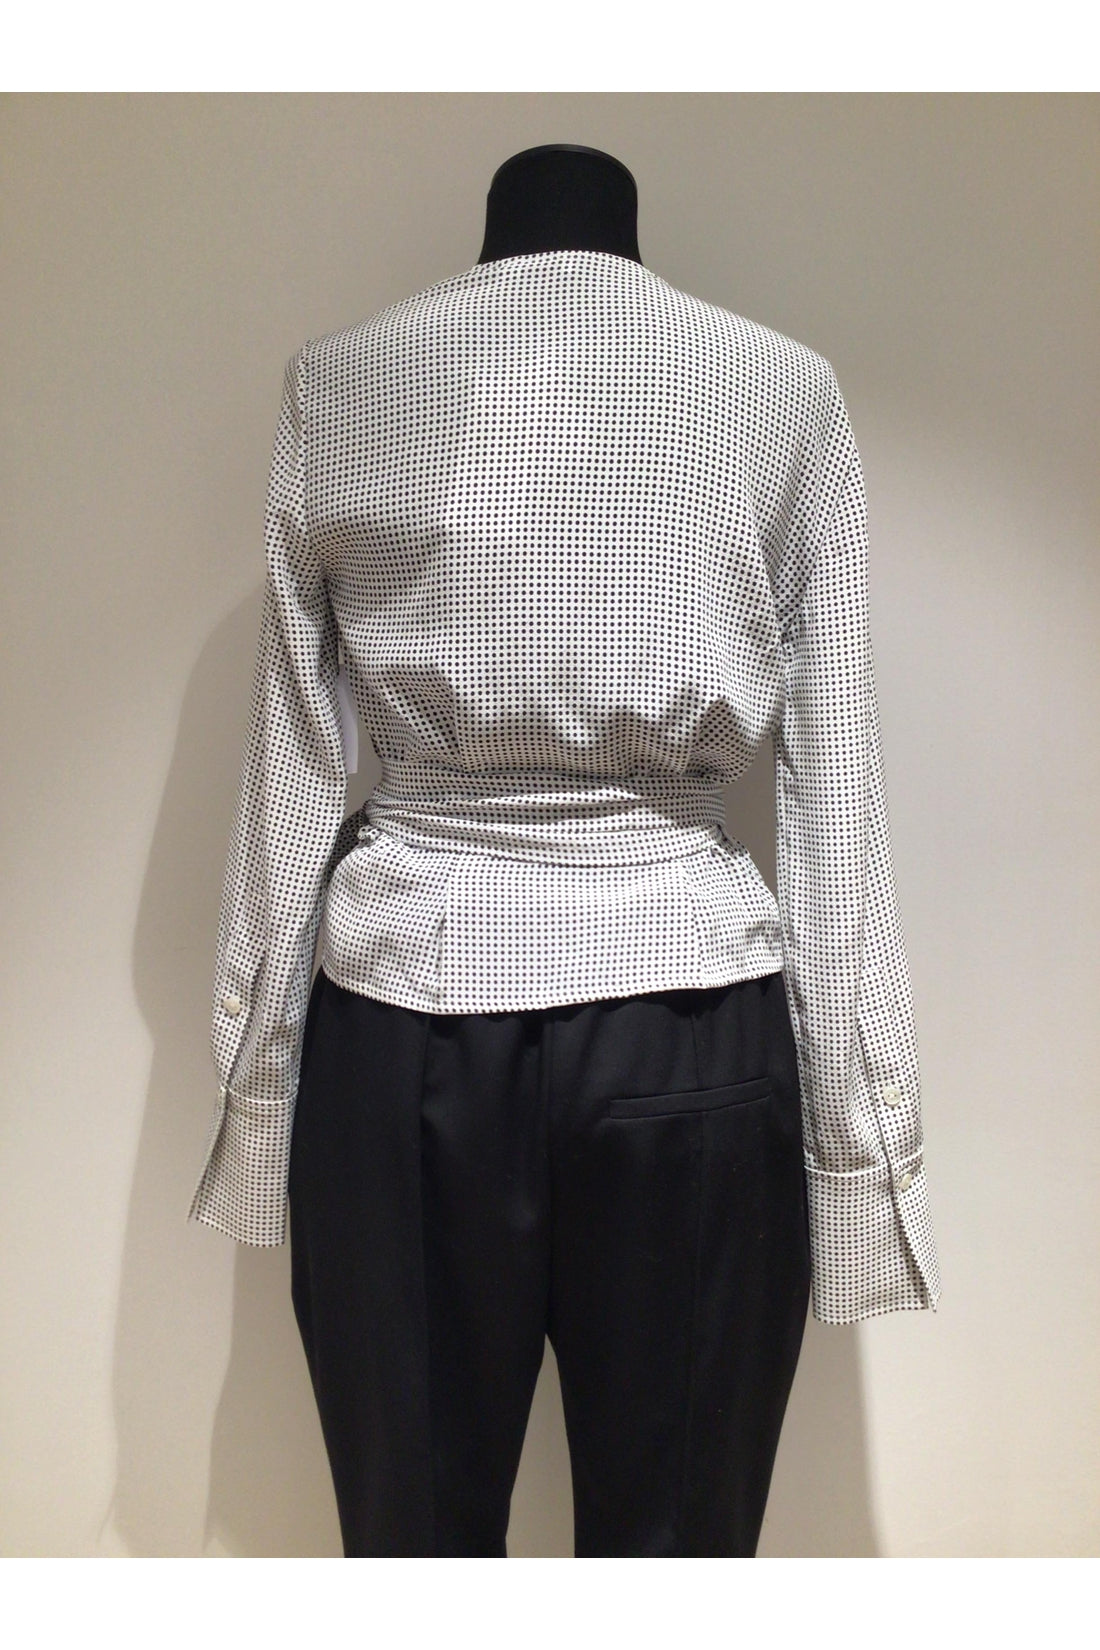 Piralo-OUTLET-SALE-Blouse with polka-dots print-ARCHIVIST